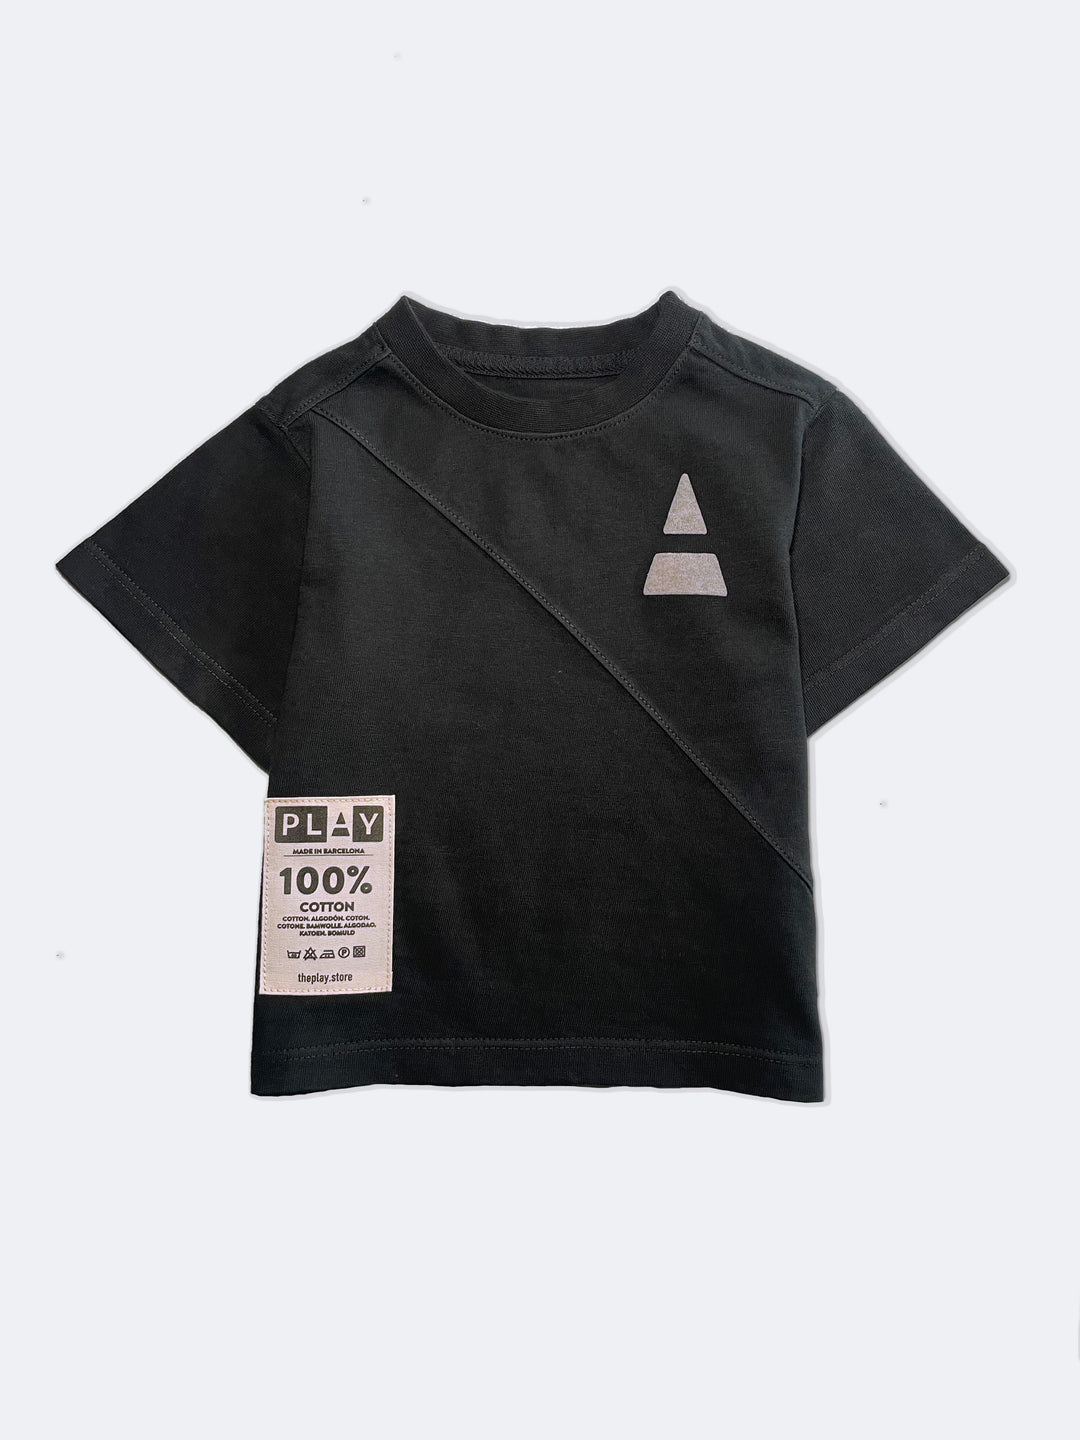 ALL WEATHER PLAY LOGO TEE-NAVY